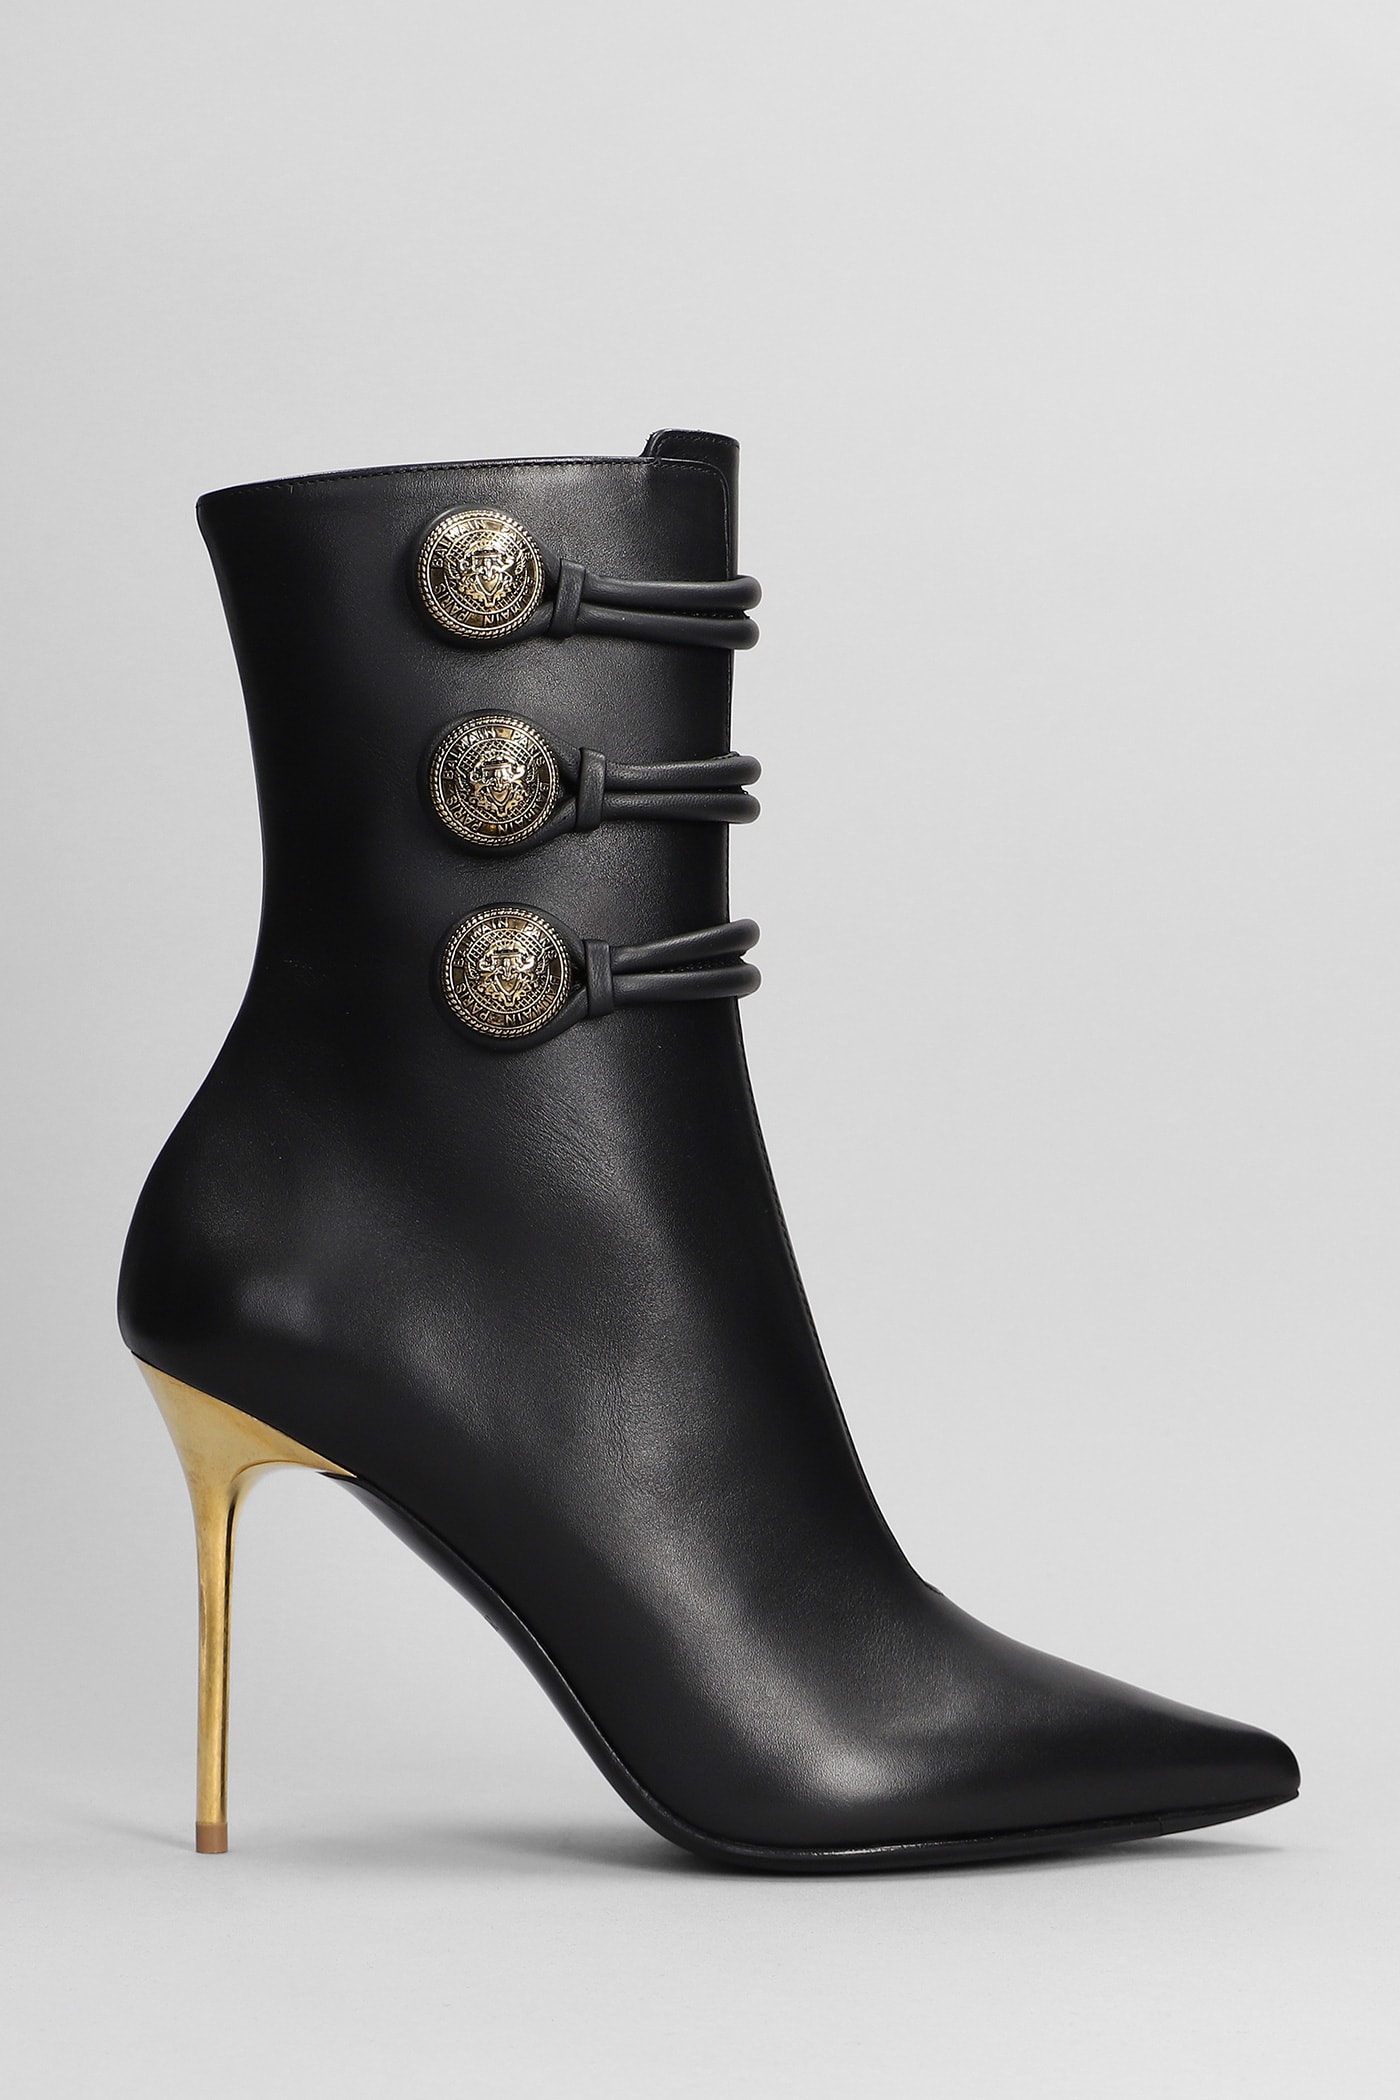 BALMAIN ALMA HIGH HEELS ANKLE BOOTS IN BLACK LEATHER